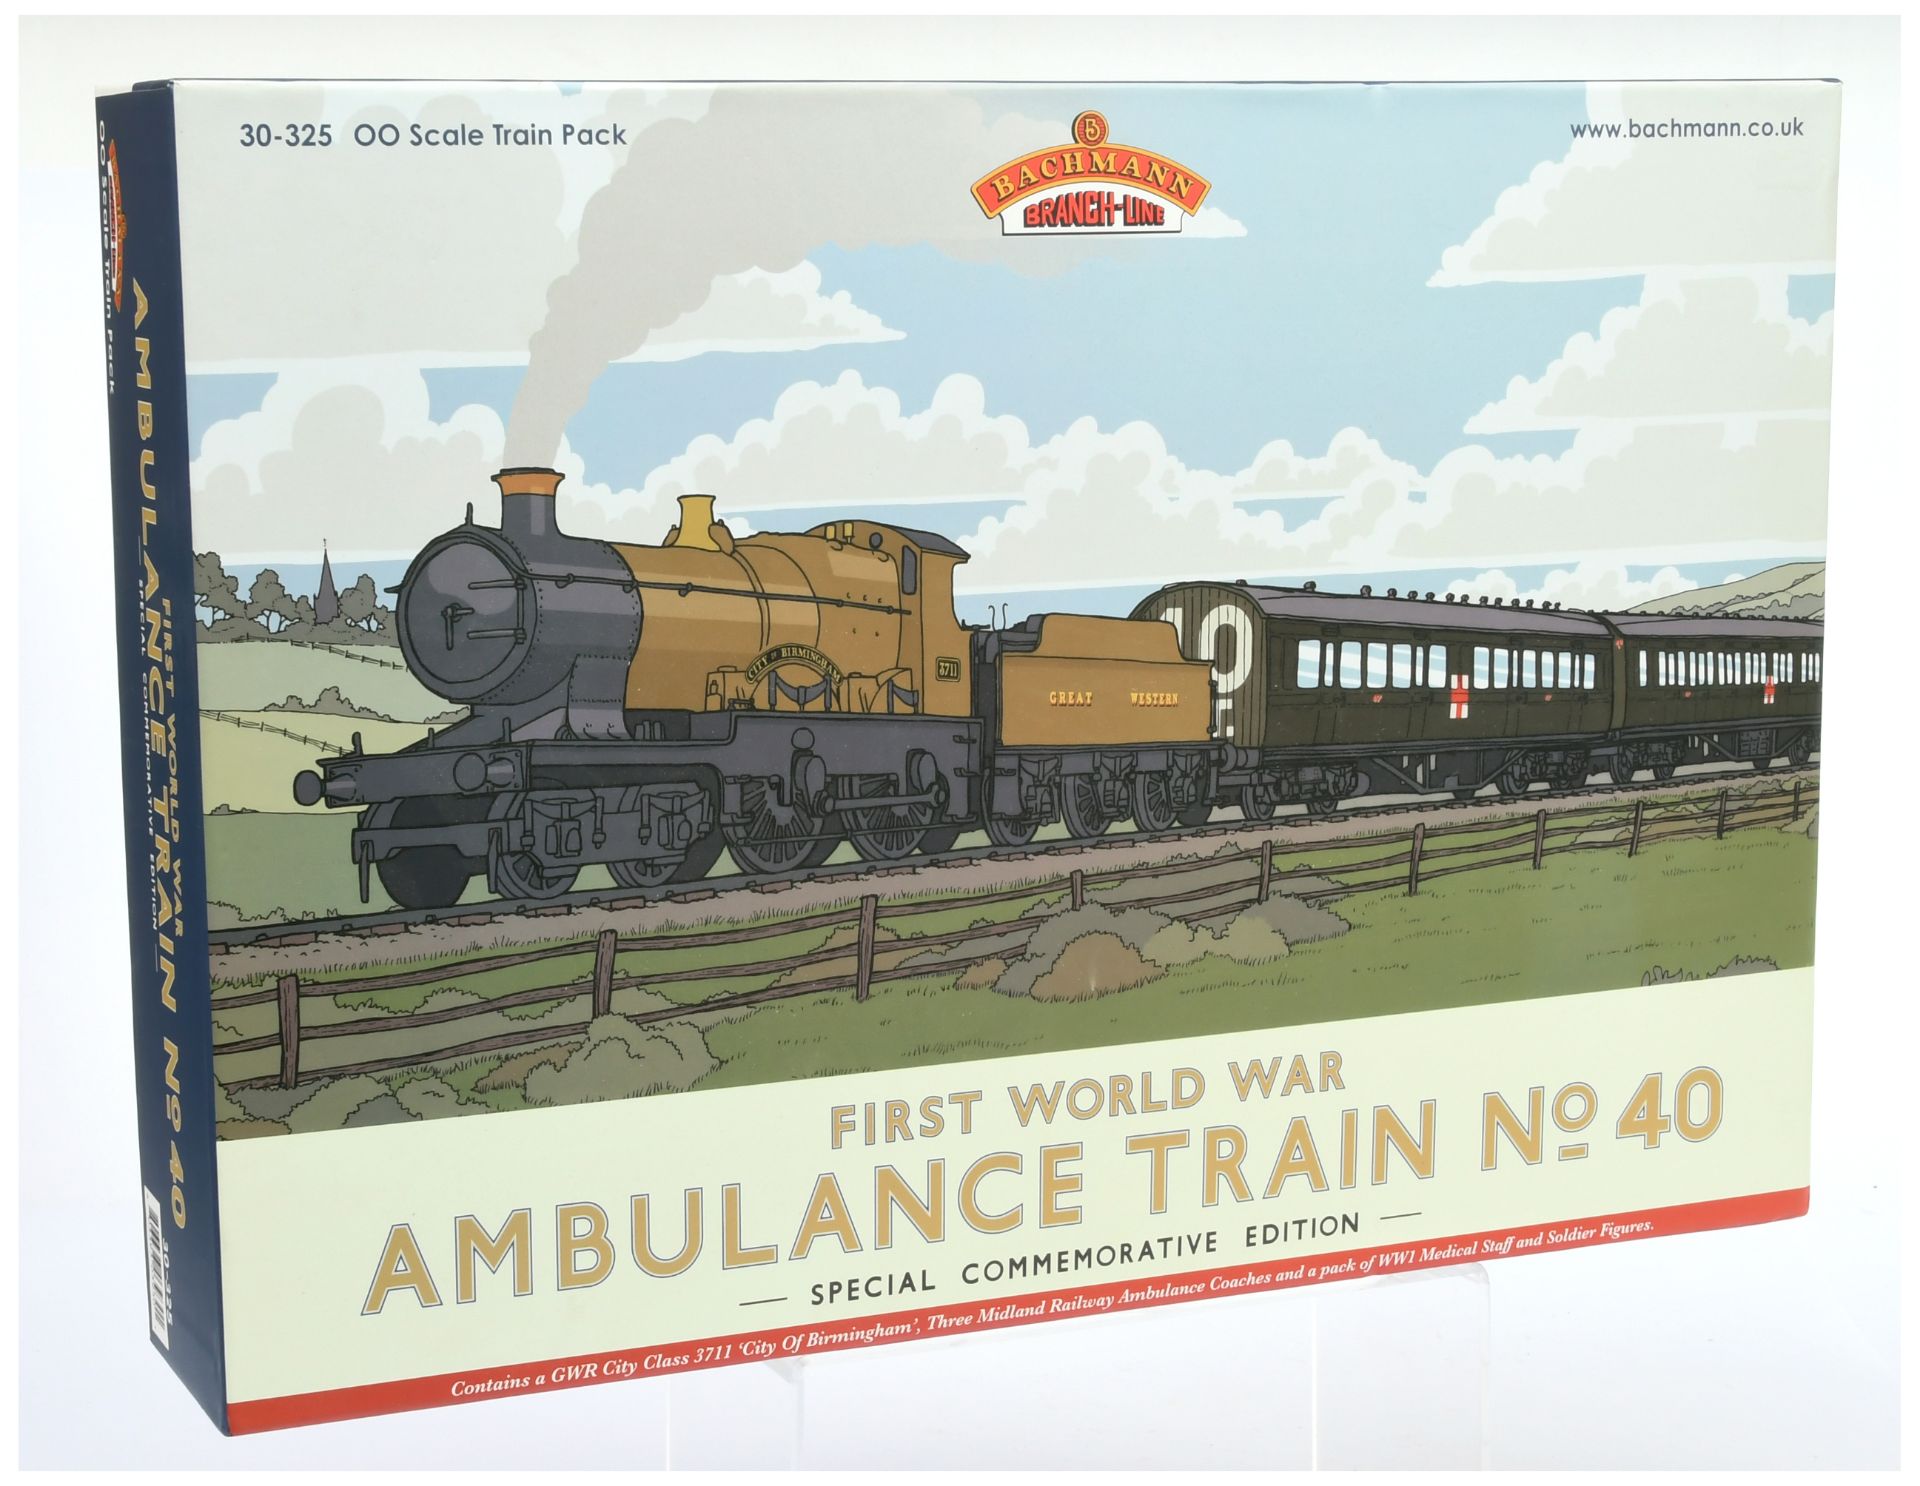 Bachmann OO Gauge 30-325 Limited Edition WW1 Ambulance Train No.40 pack - Image 2 of 2